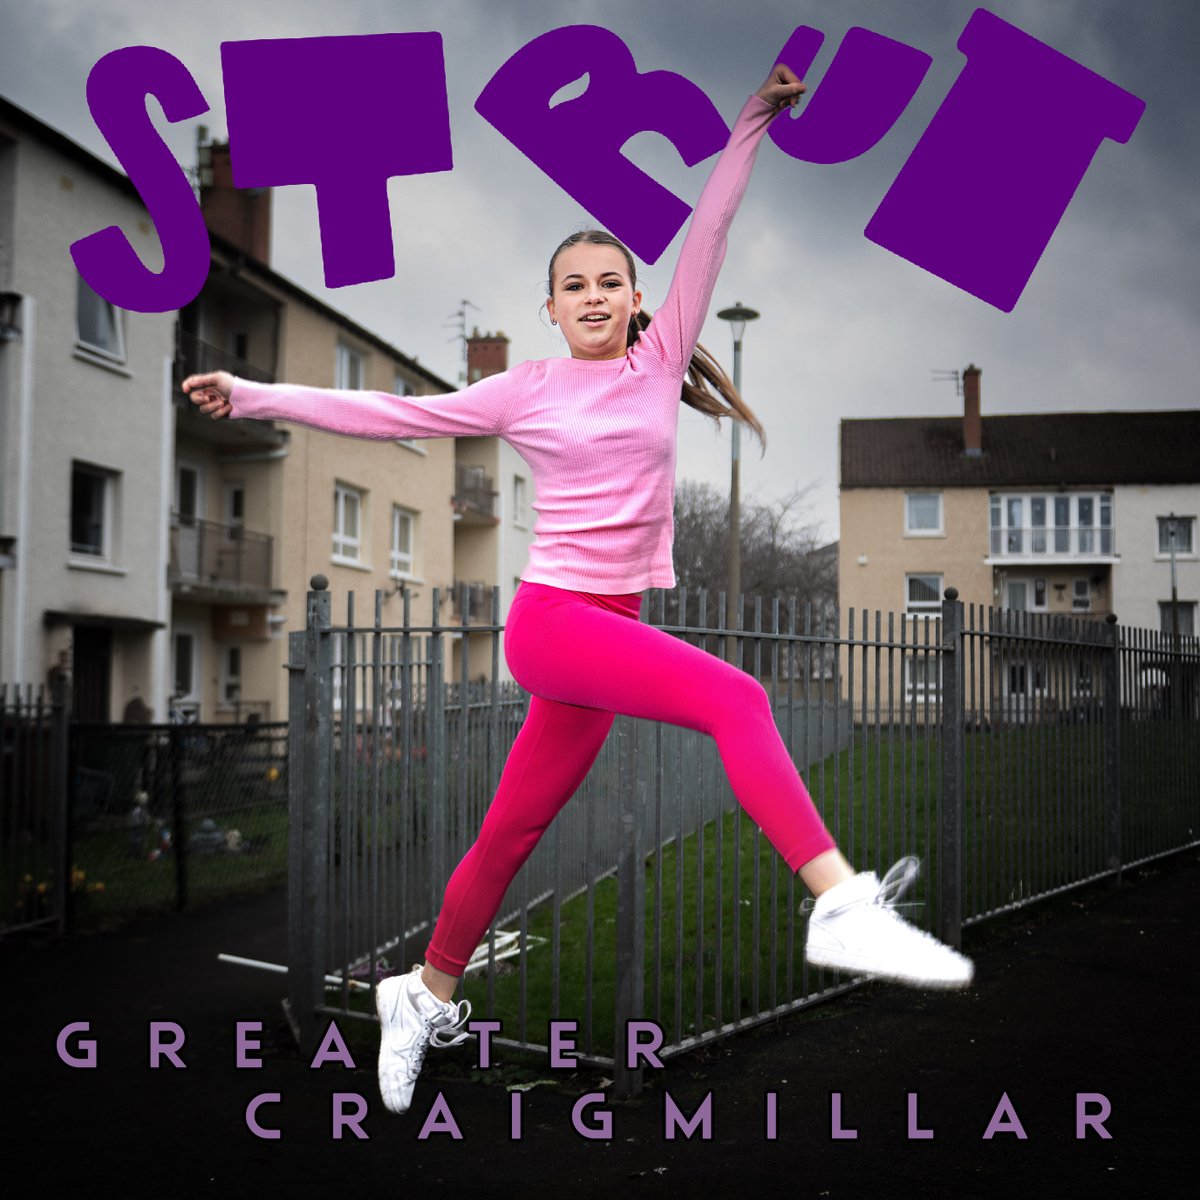 💃STRUT – OUTDOOR DANCE PERFORMANCE COMES TO GREATER CRAIGMILLAR Join us for MHz’s FREE outdoor performance of STRUT in partnership with Lyra on Wed 20th March (Craigmillar) and Thurs 21stMarch (Niddrie)